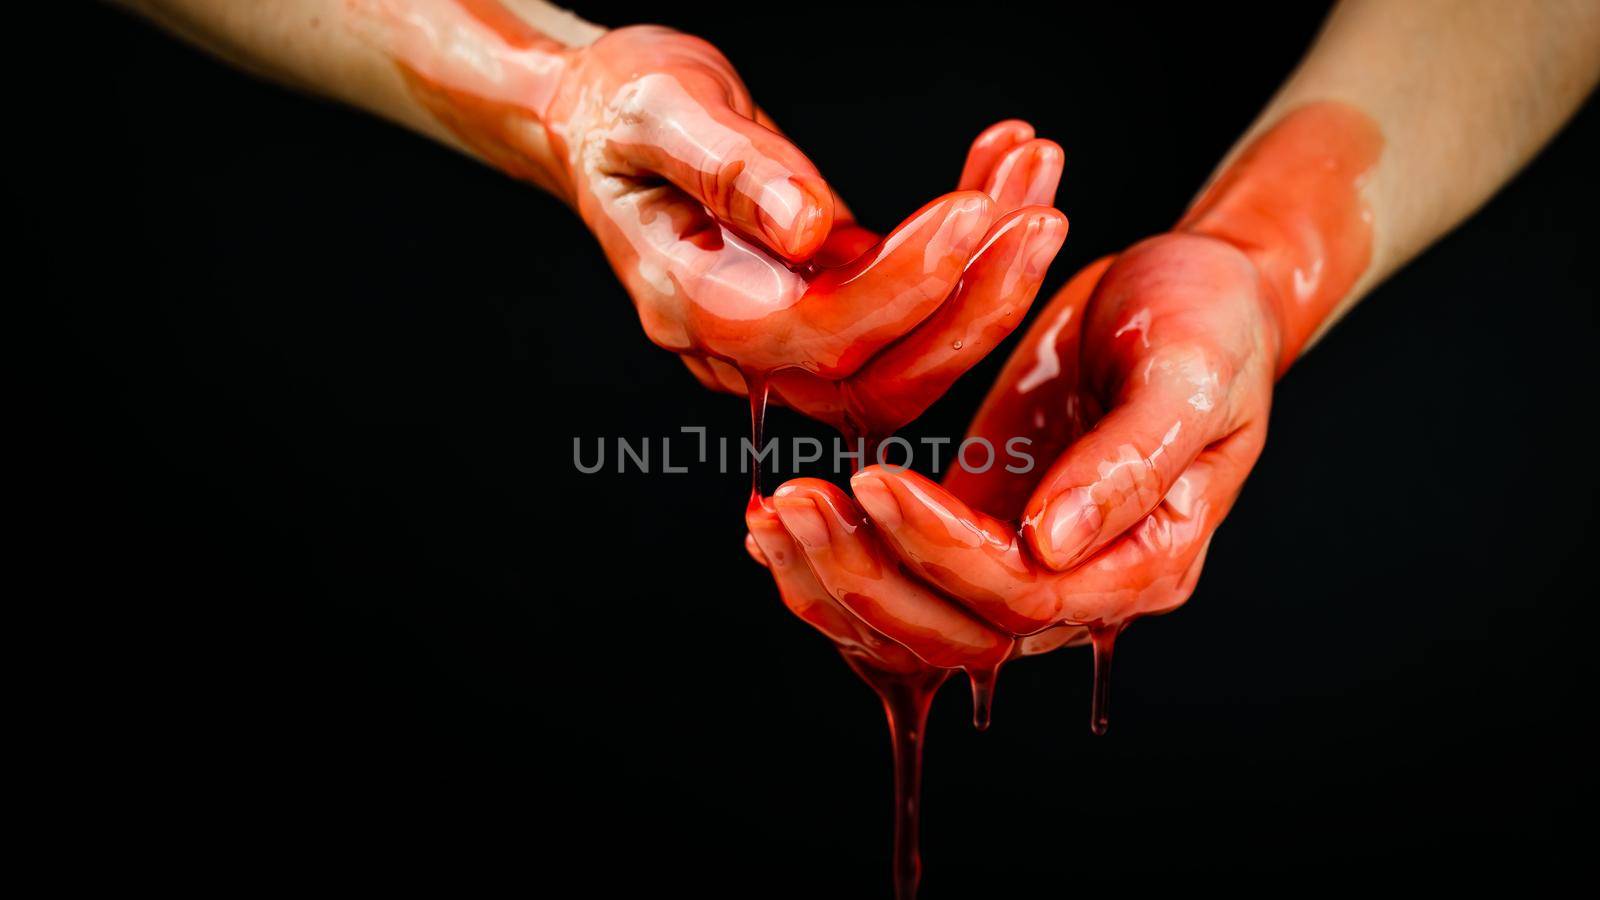 Women's hands in a viscous red liquid similar to blood. by mrwed54